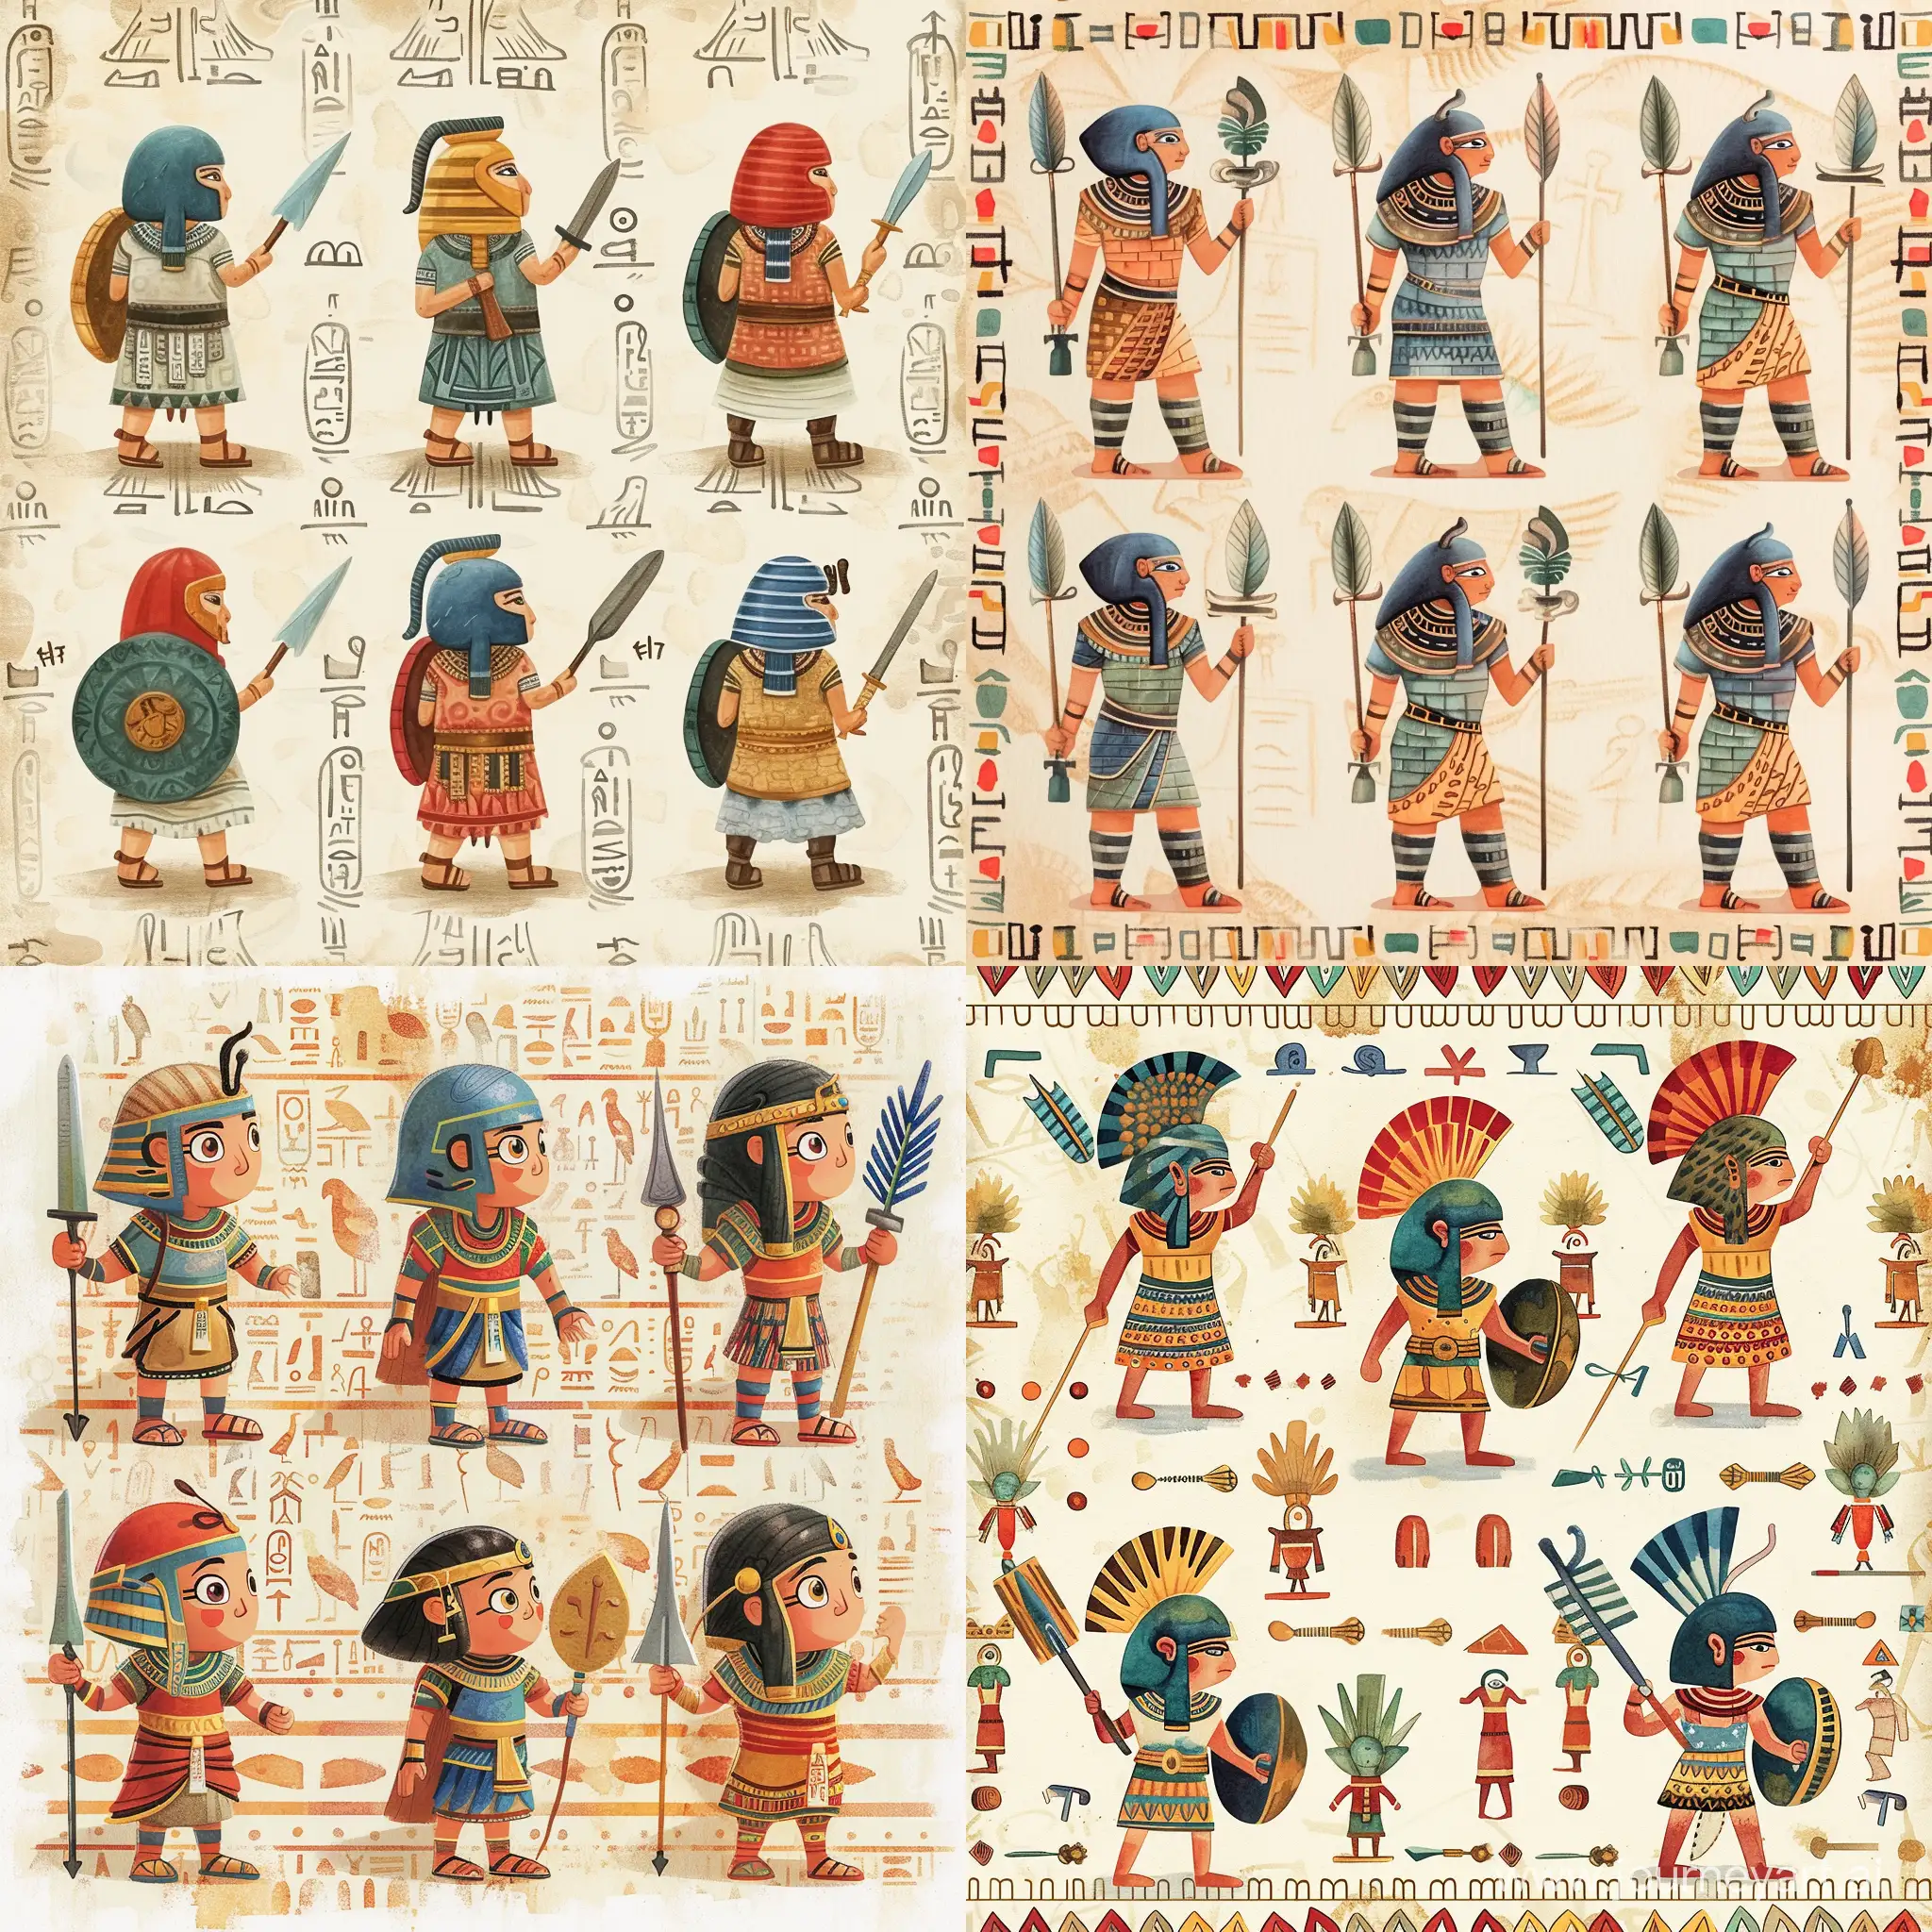 Six small figures of warriors of Ancient Egypt, against the background of the pattern of ancient Egypt, fabulous illustration, stylized caricature, Victor Nagi, watercolor, decorative, flat drawing